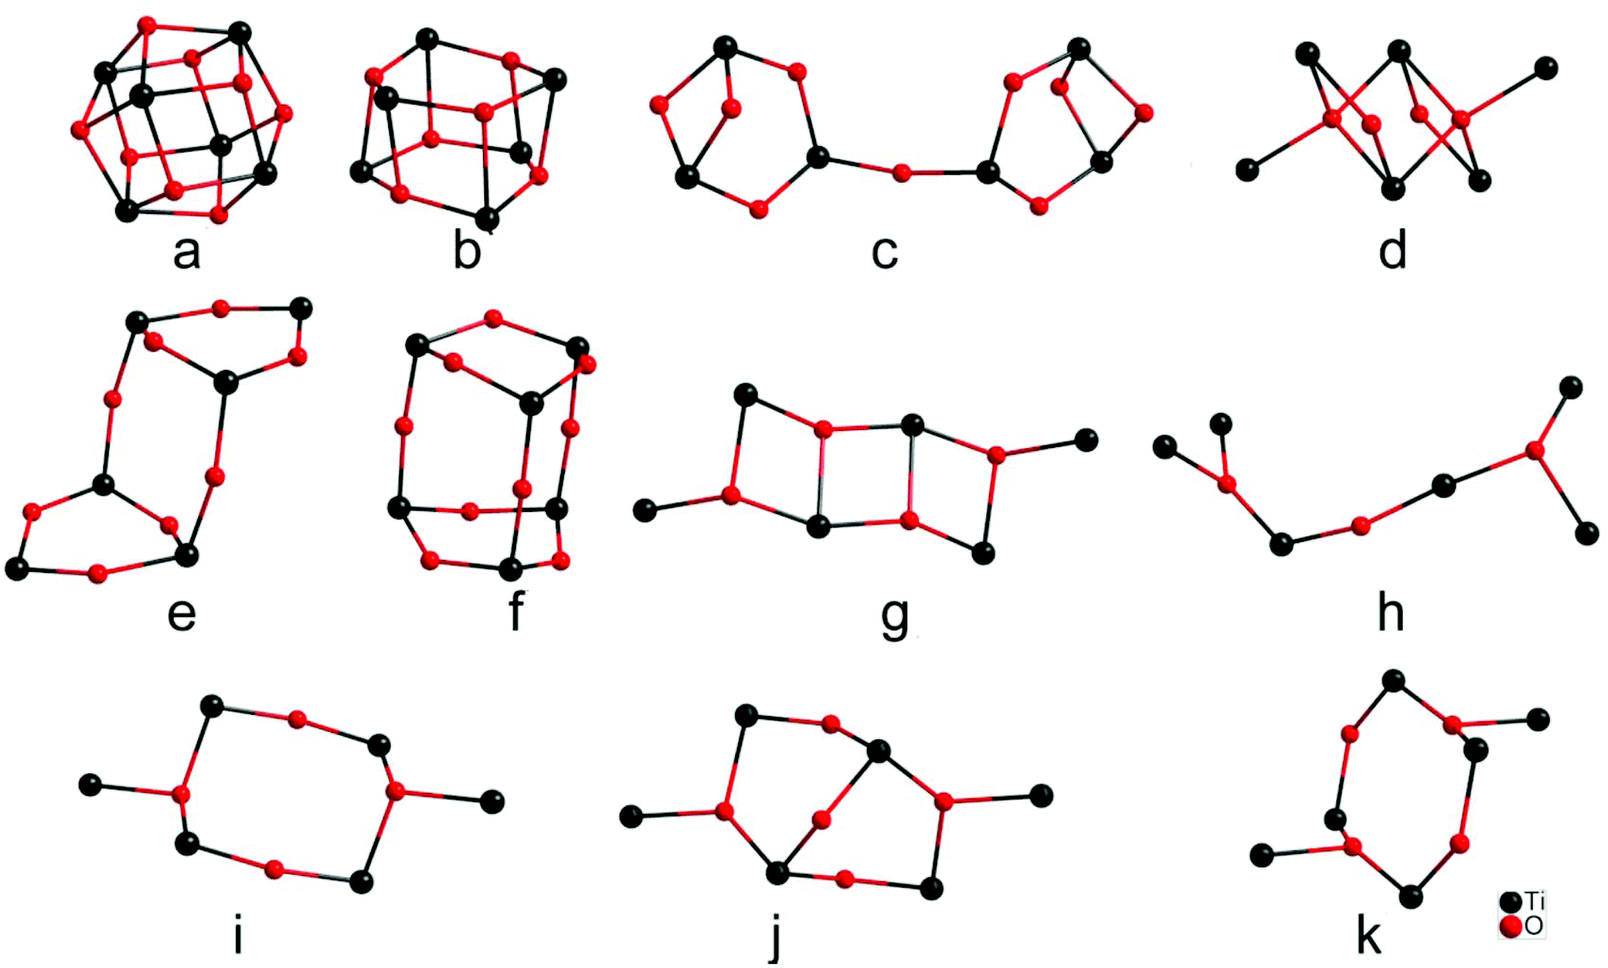 Synthesis, Structural, and Physicochemical Characterization of a Ti6 and a  Unique Type of Zr6 Oxo Clusters Bearing an Electron-Rich Unsymmetrical  {OON} Catecholate/Oxime Ligand and Exhibiting Metalloaromaticity